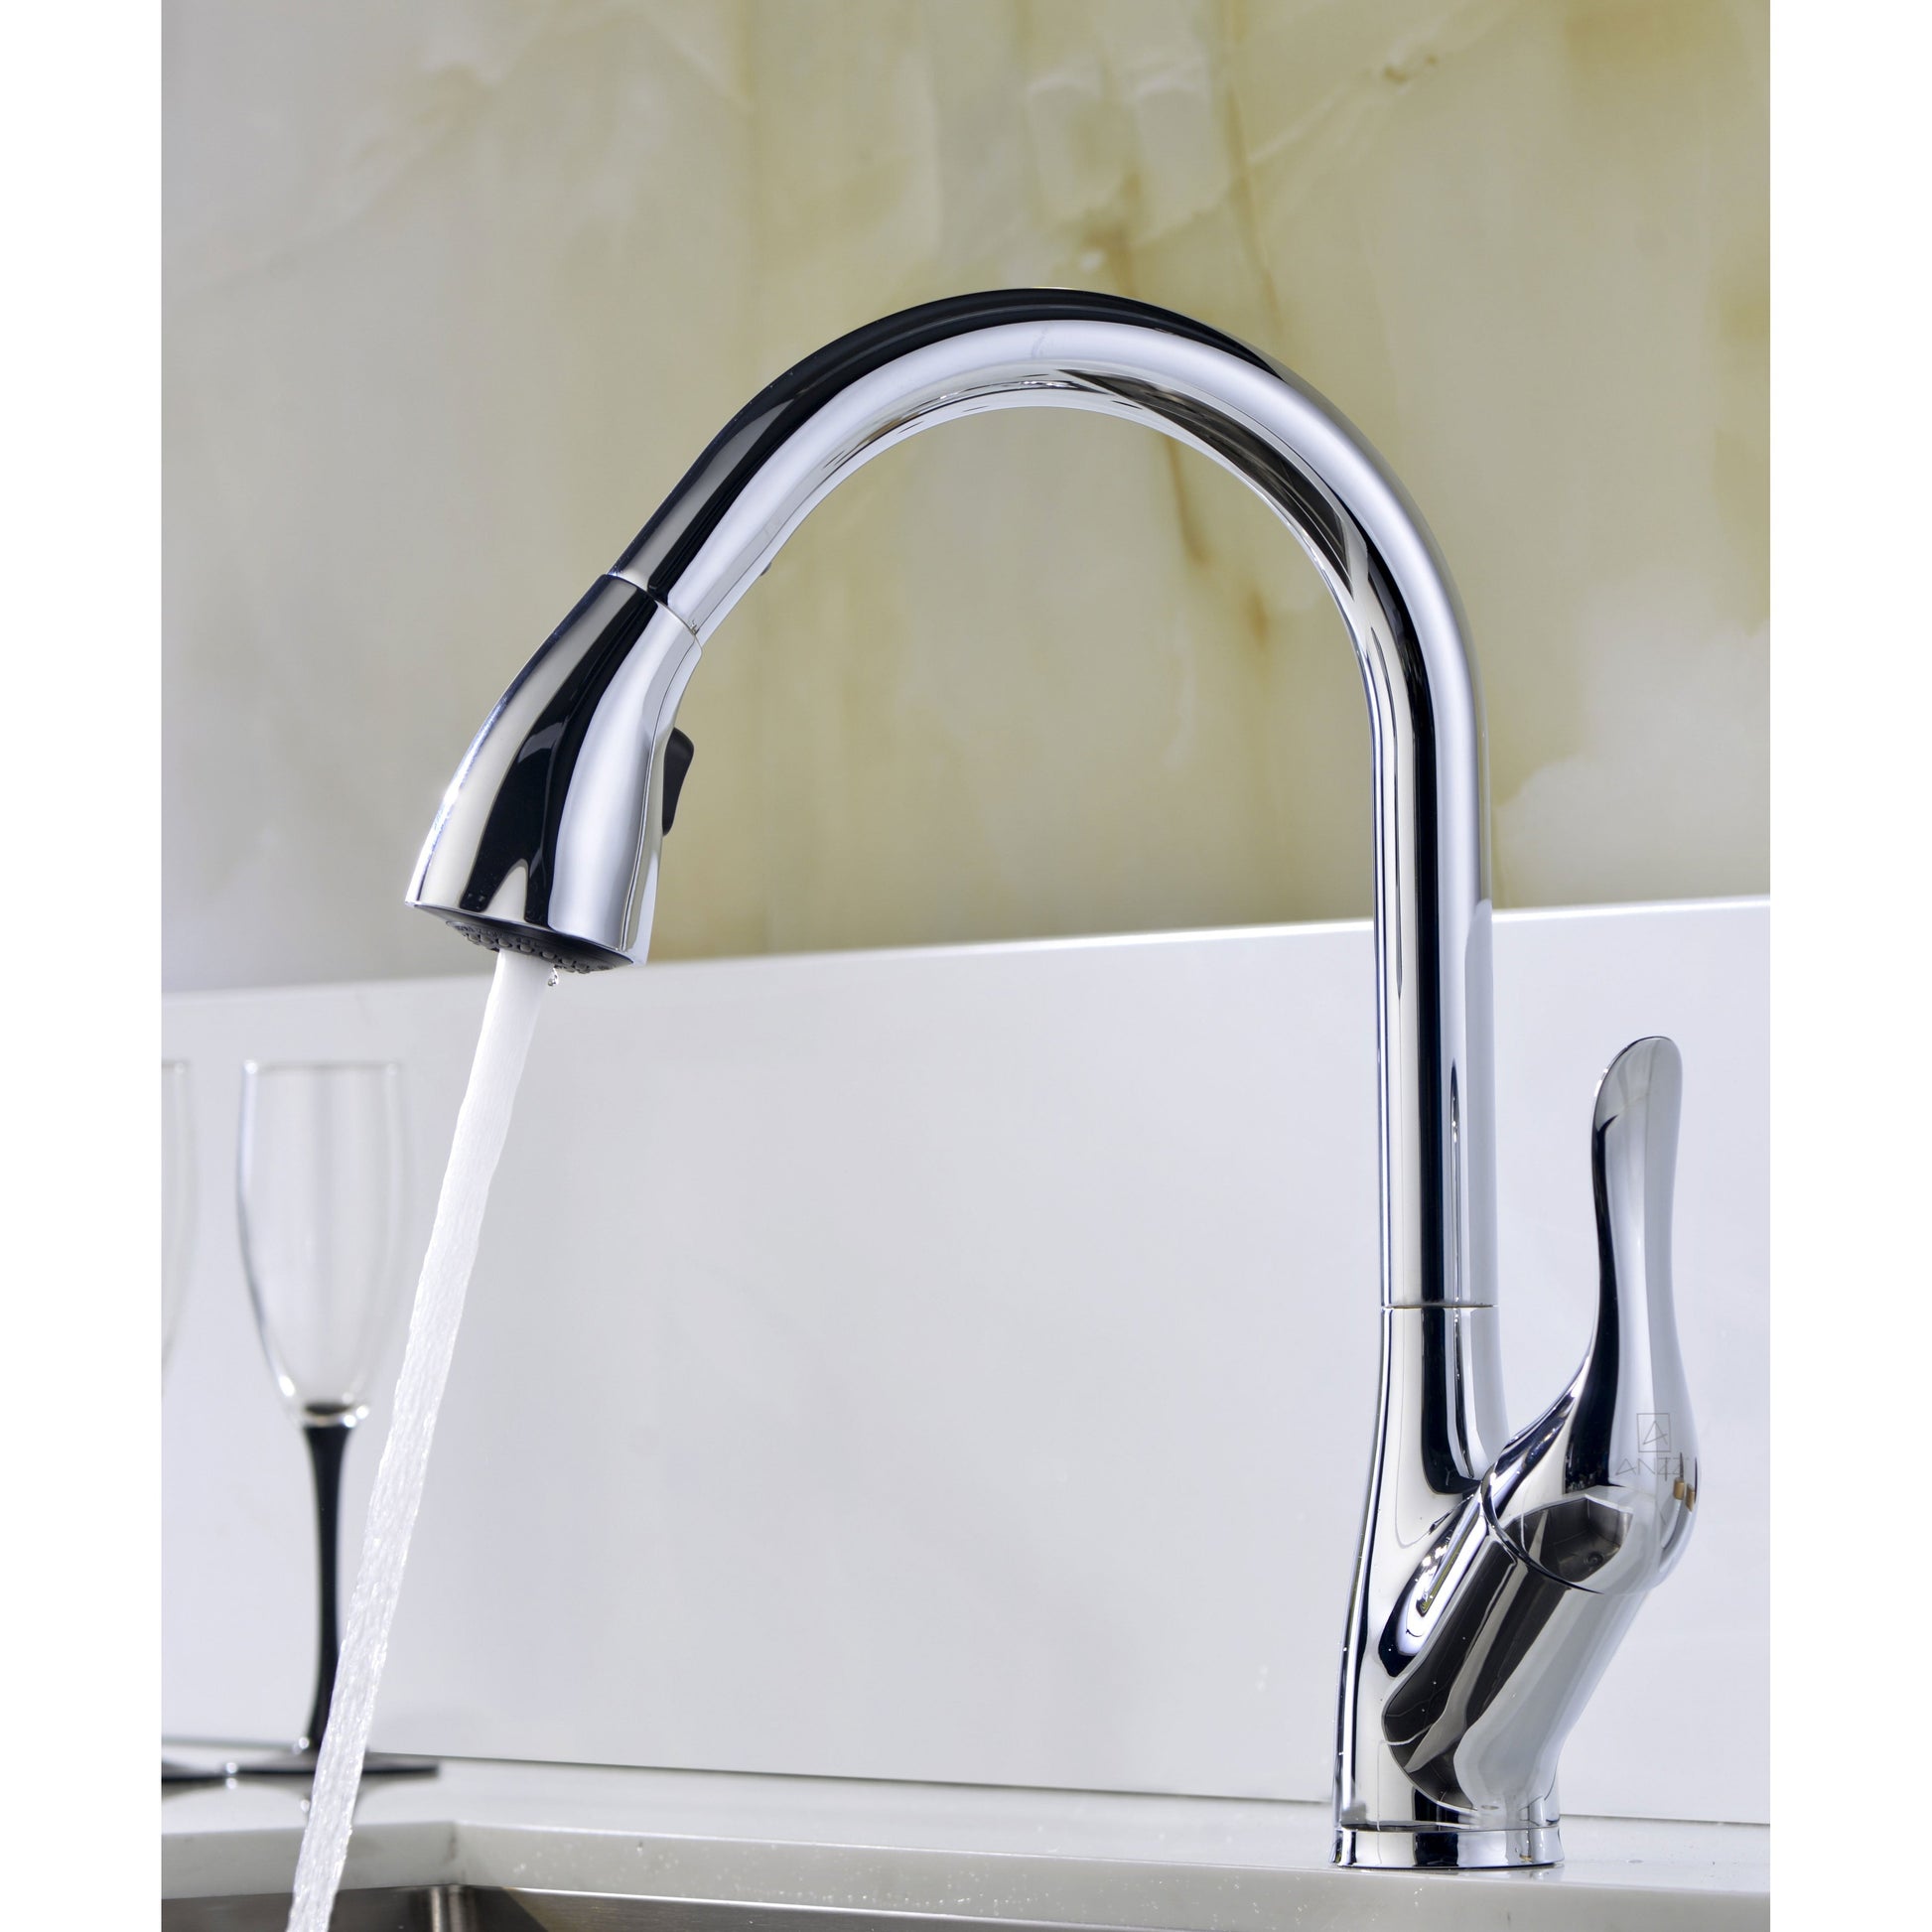 ANZZI Elysian Series 36" Single Basin Stainless Steel Farmhouse Kitchen Sink With Strainer and Polished Chrome Accent Faucet